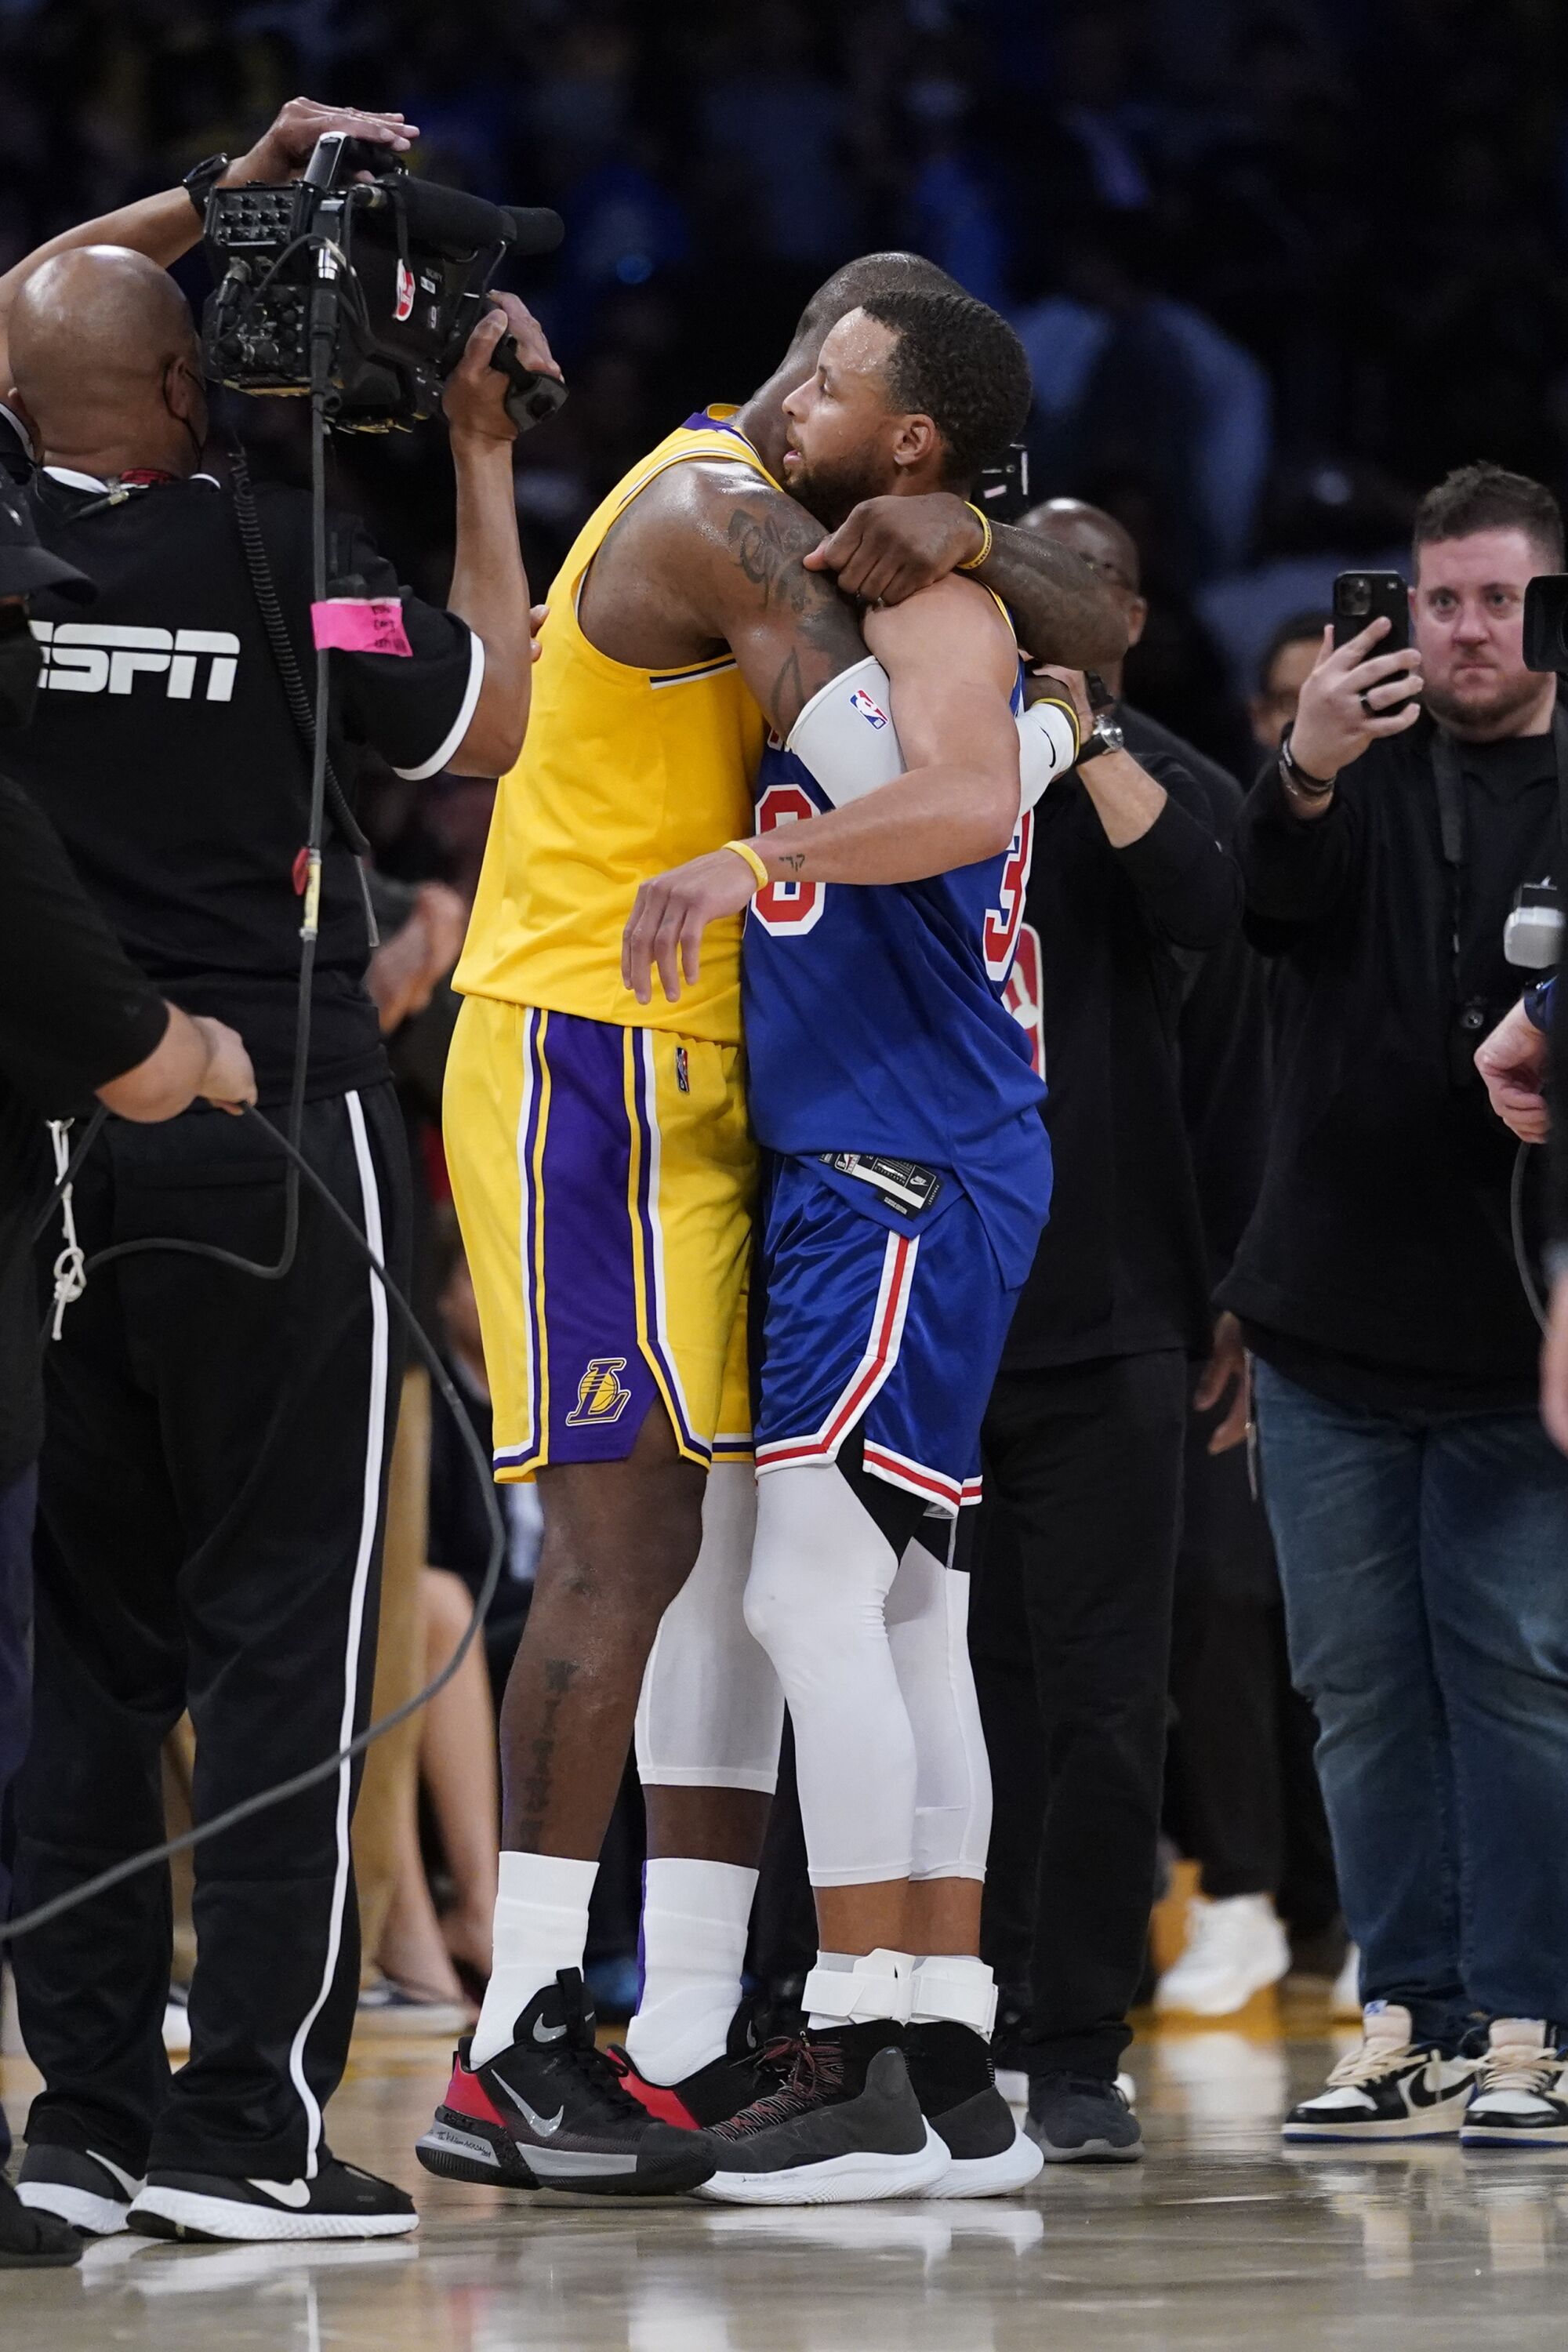 Lakers forward LeBron James and Warriors guard Stephen Curry embrace after the game.